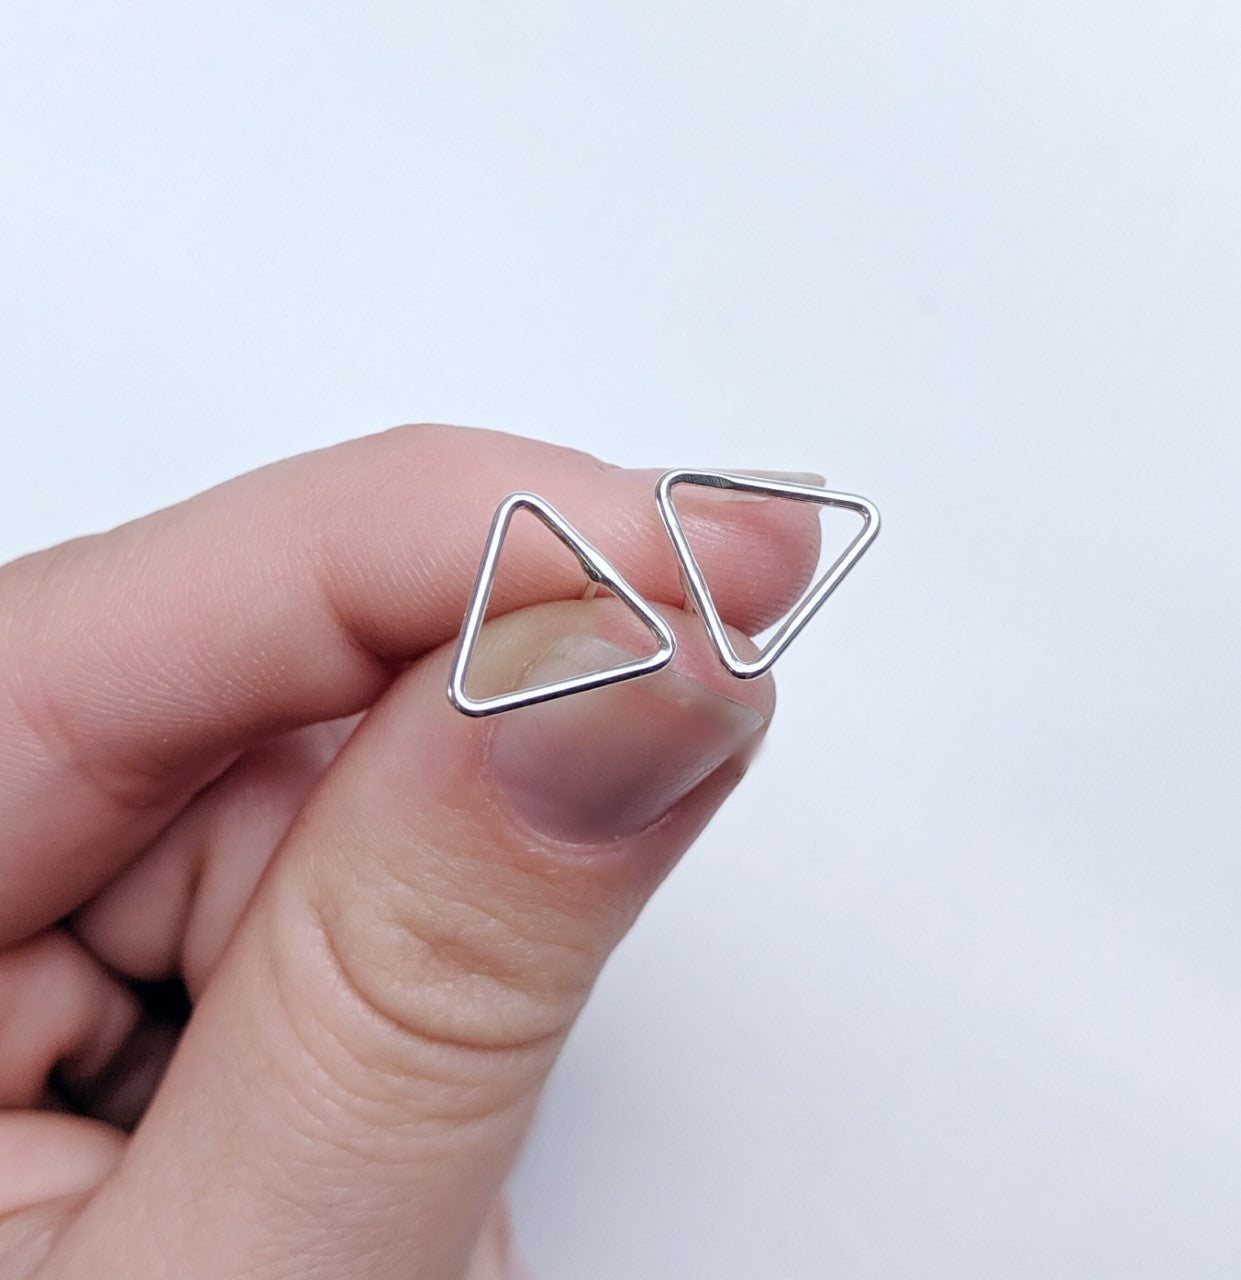 Triangular stud earrings made by An American Metalsmith